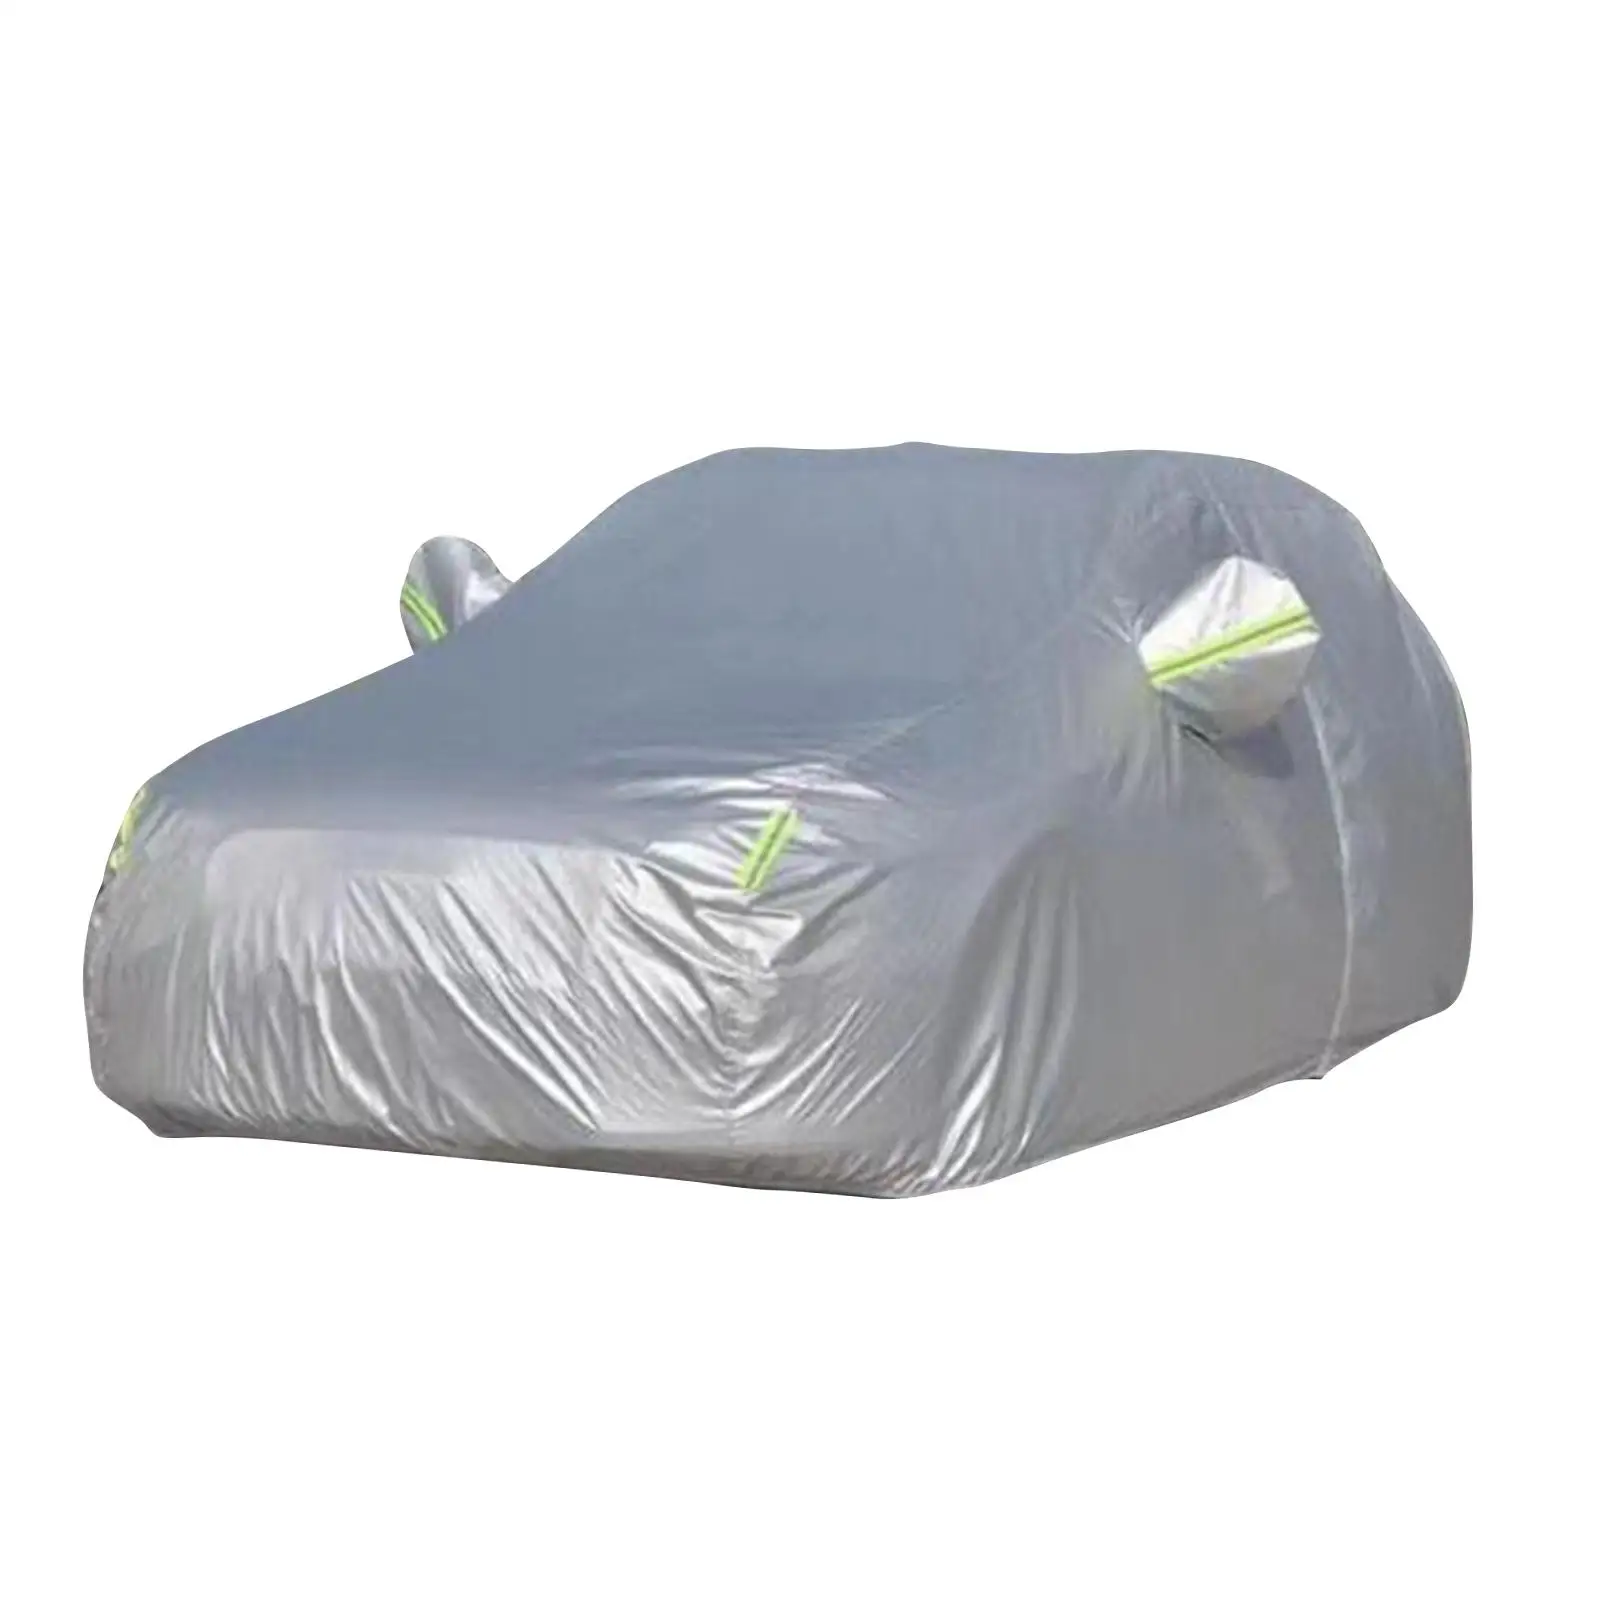 Sedan Car Cover Waterproof Full Cover Oxford Cloth Snow Dust Resistant for Byd Atto 3 Yuan Plus